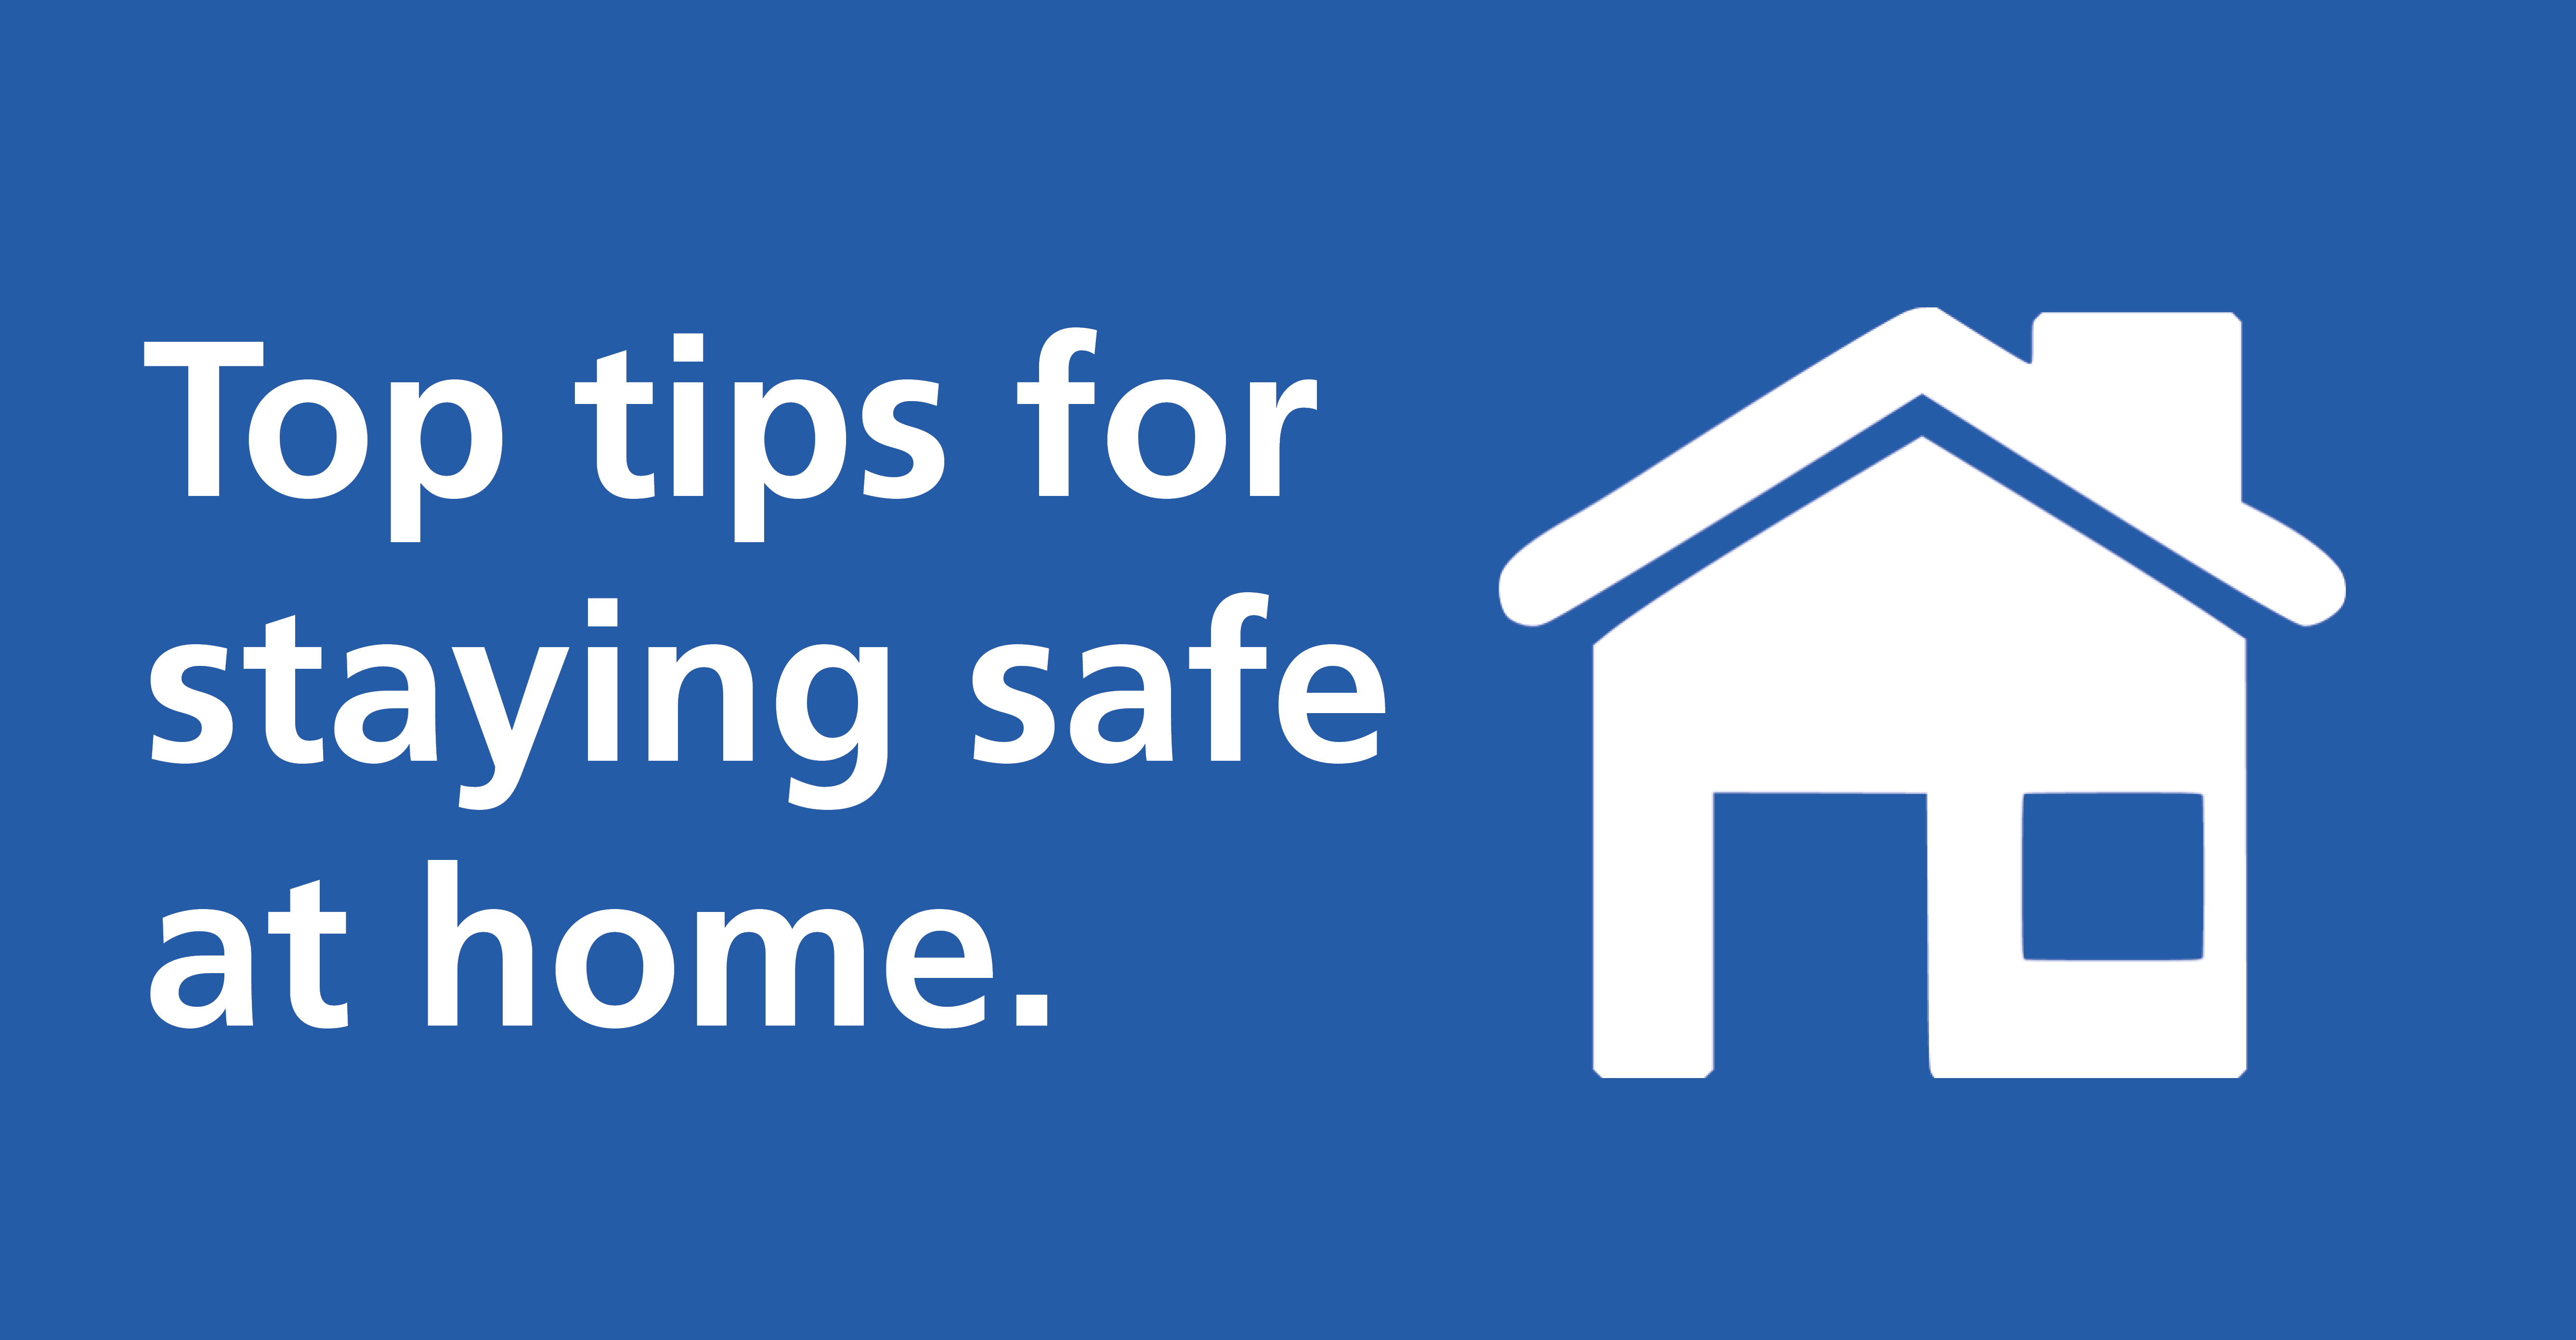 Correct precautions should be followed when undertaking any home improvements